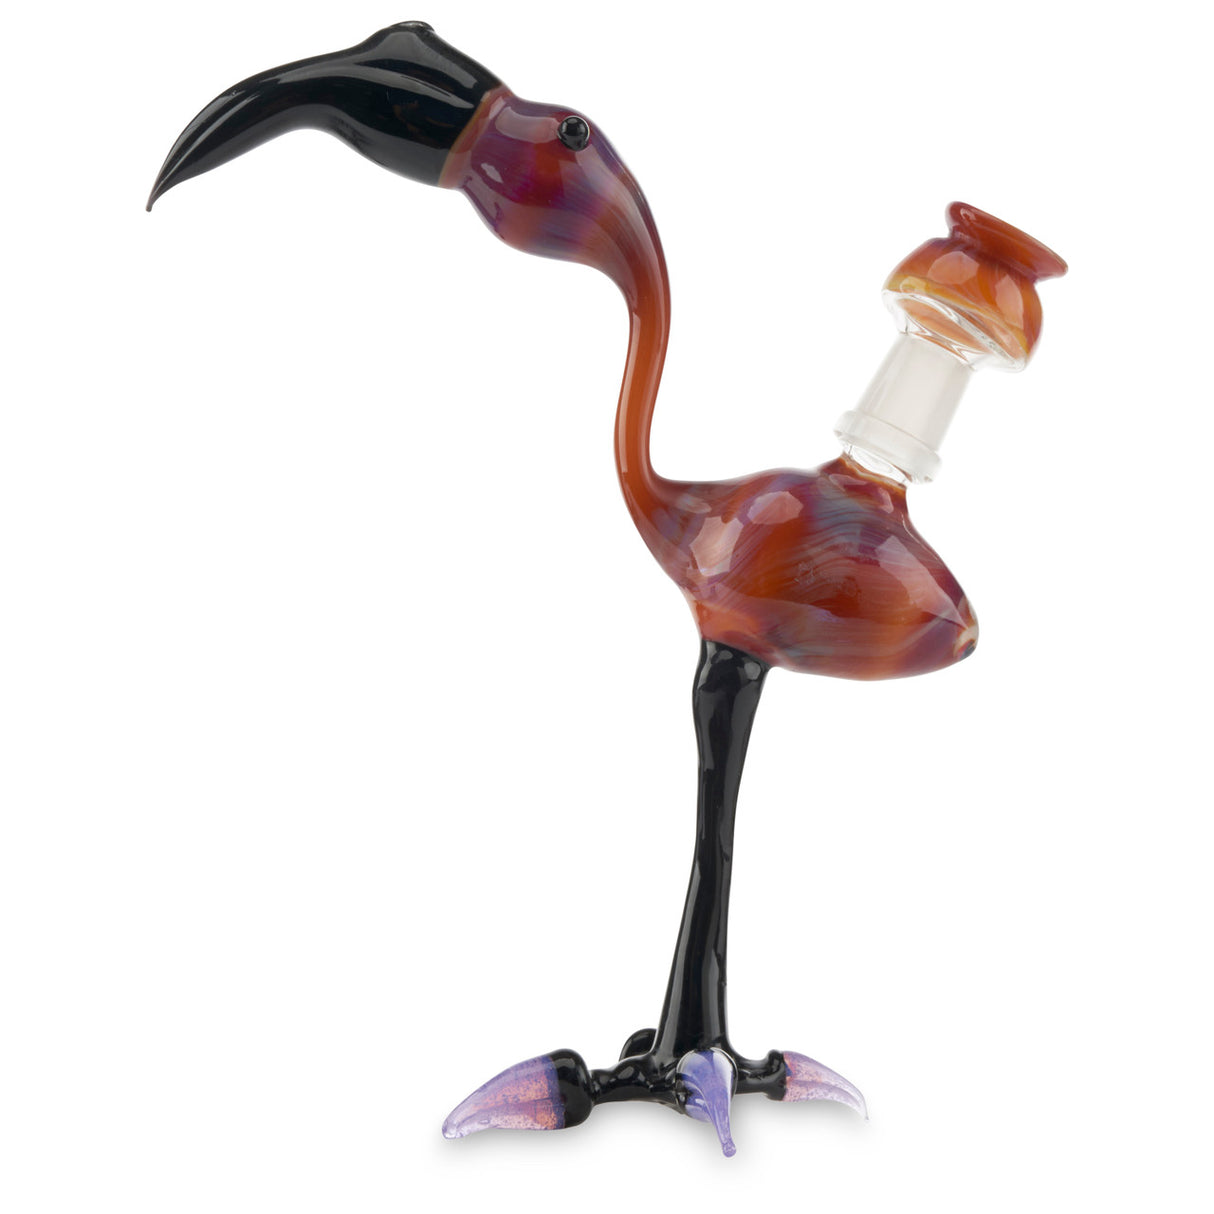 Jahni glass flamingo rig in stock at cloud 9 smoke co